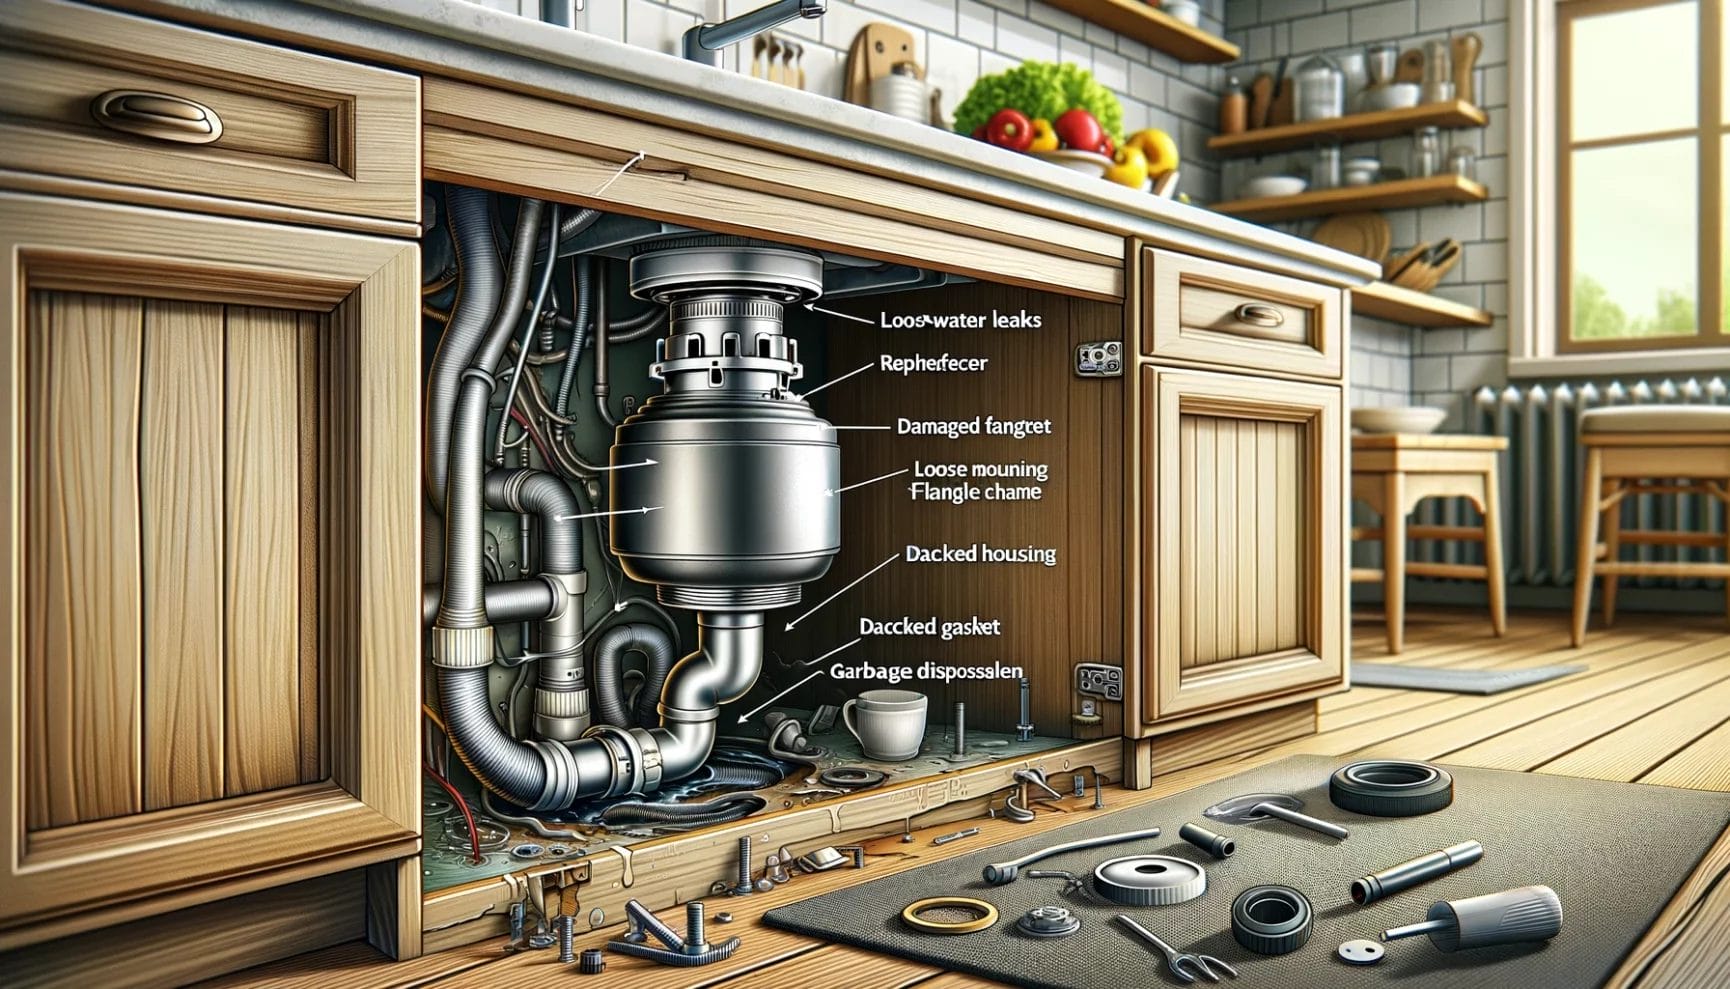 Kitchen cabinet cutaway revealing the internal plumbing and mechanisms of a garbage disposal, with labels indicating various parts and potential issues.